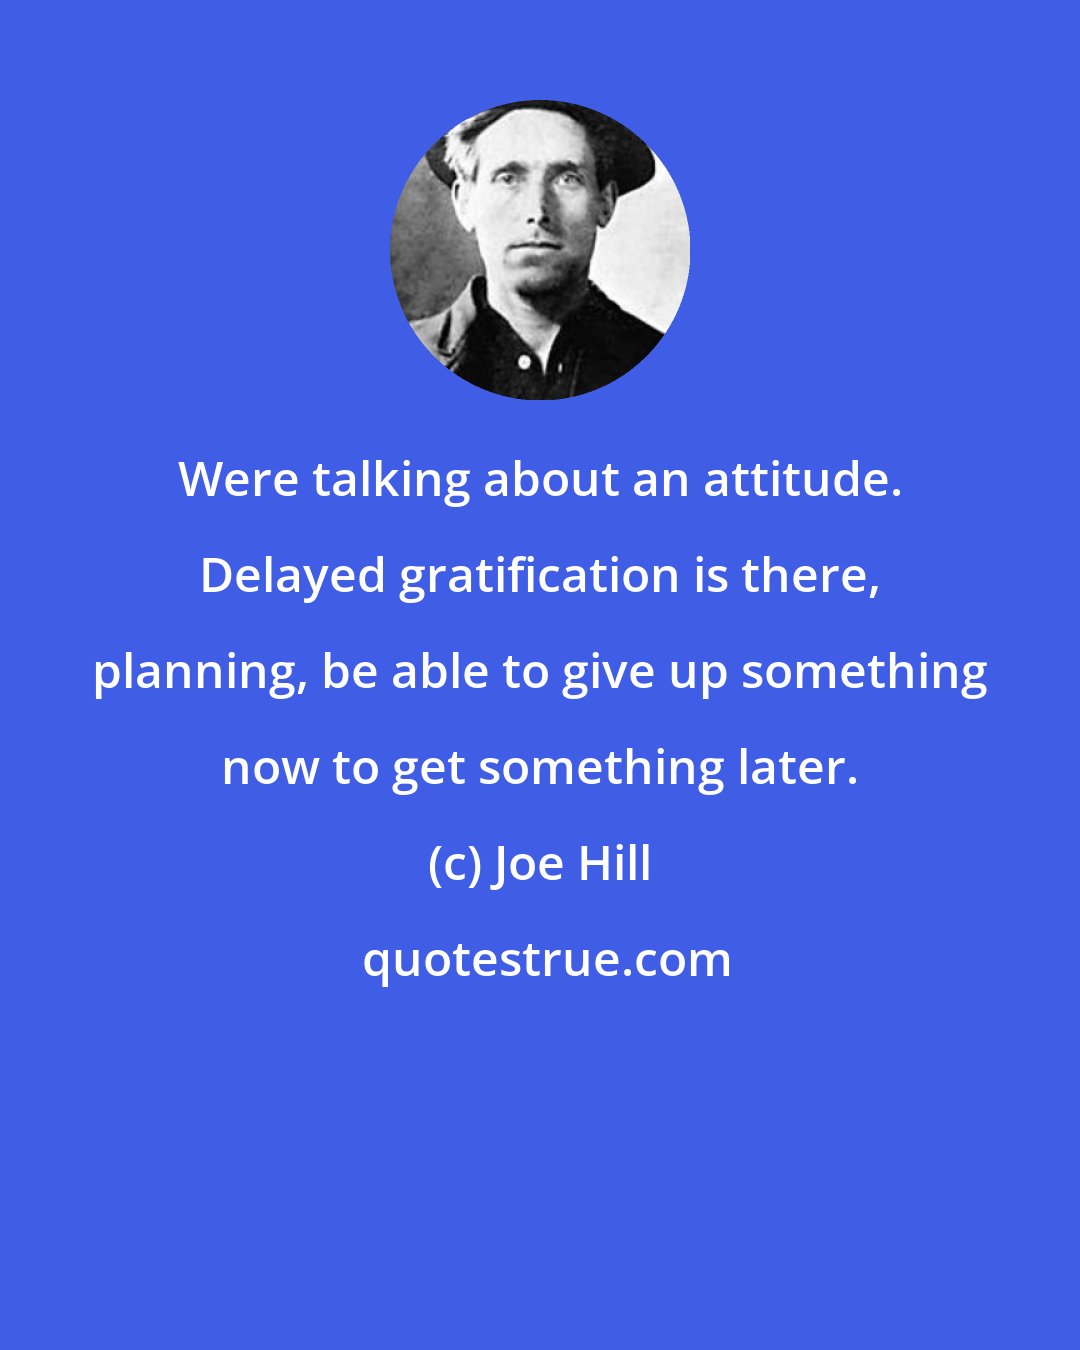 Joe Hill: Were talking about an attitude. Delayed gratification is there, planning, be able to give up something now to get something later.